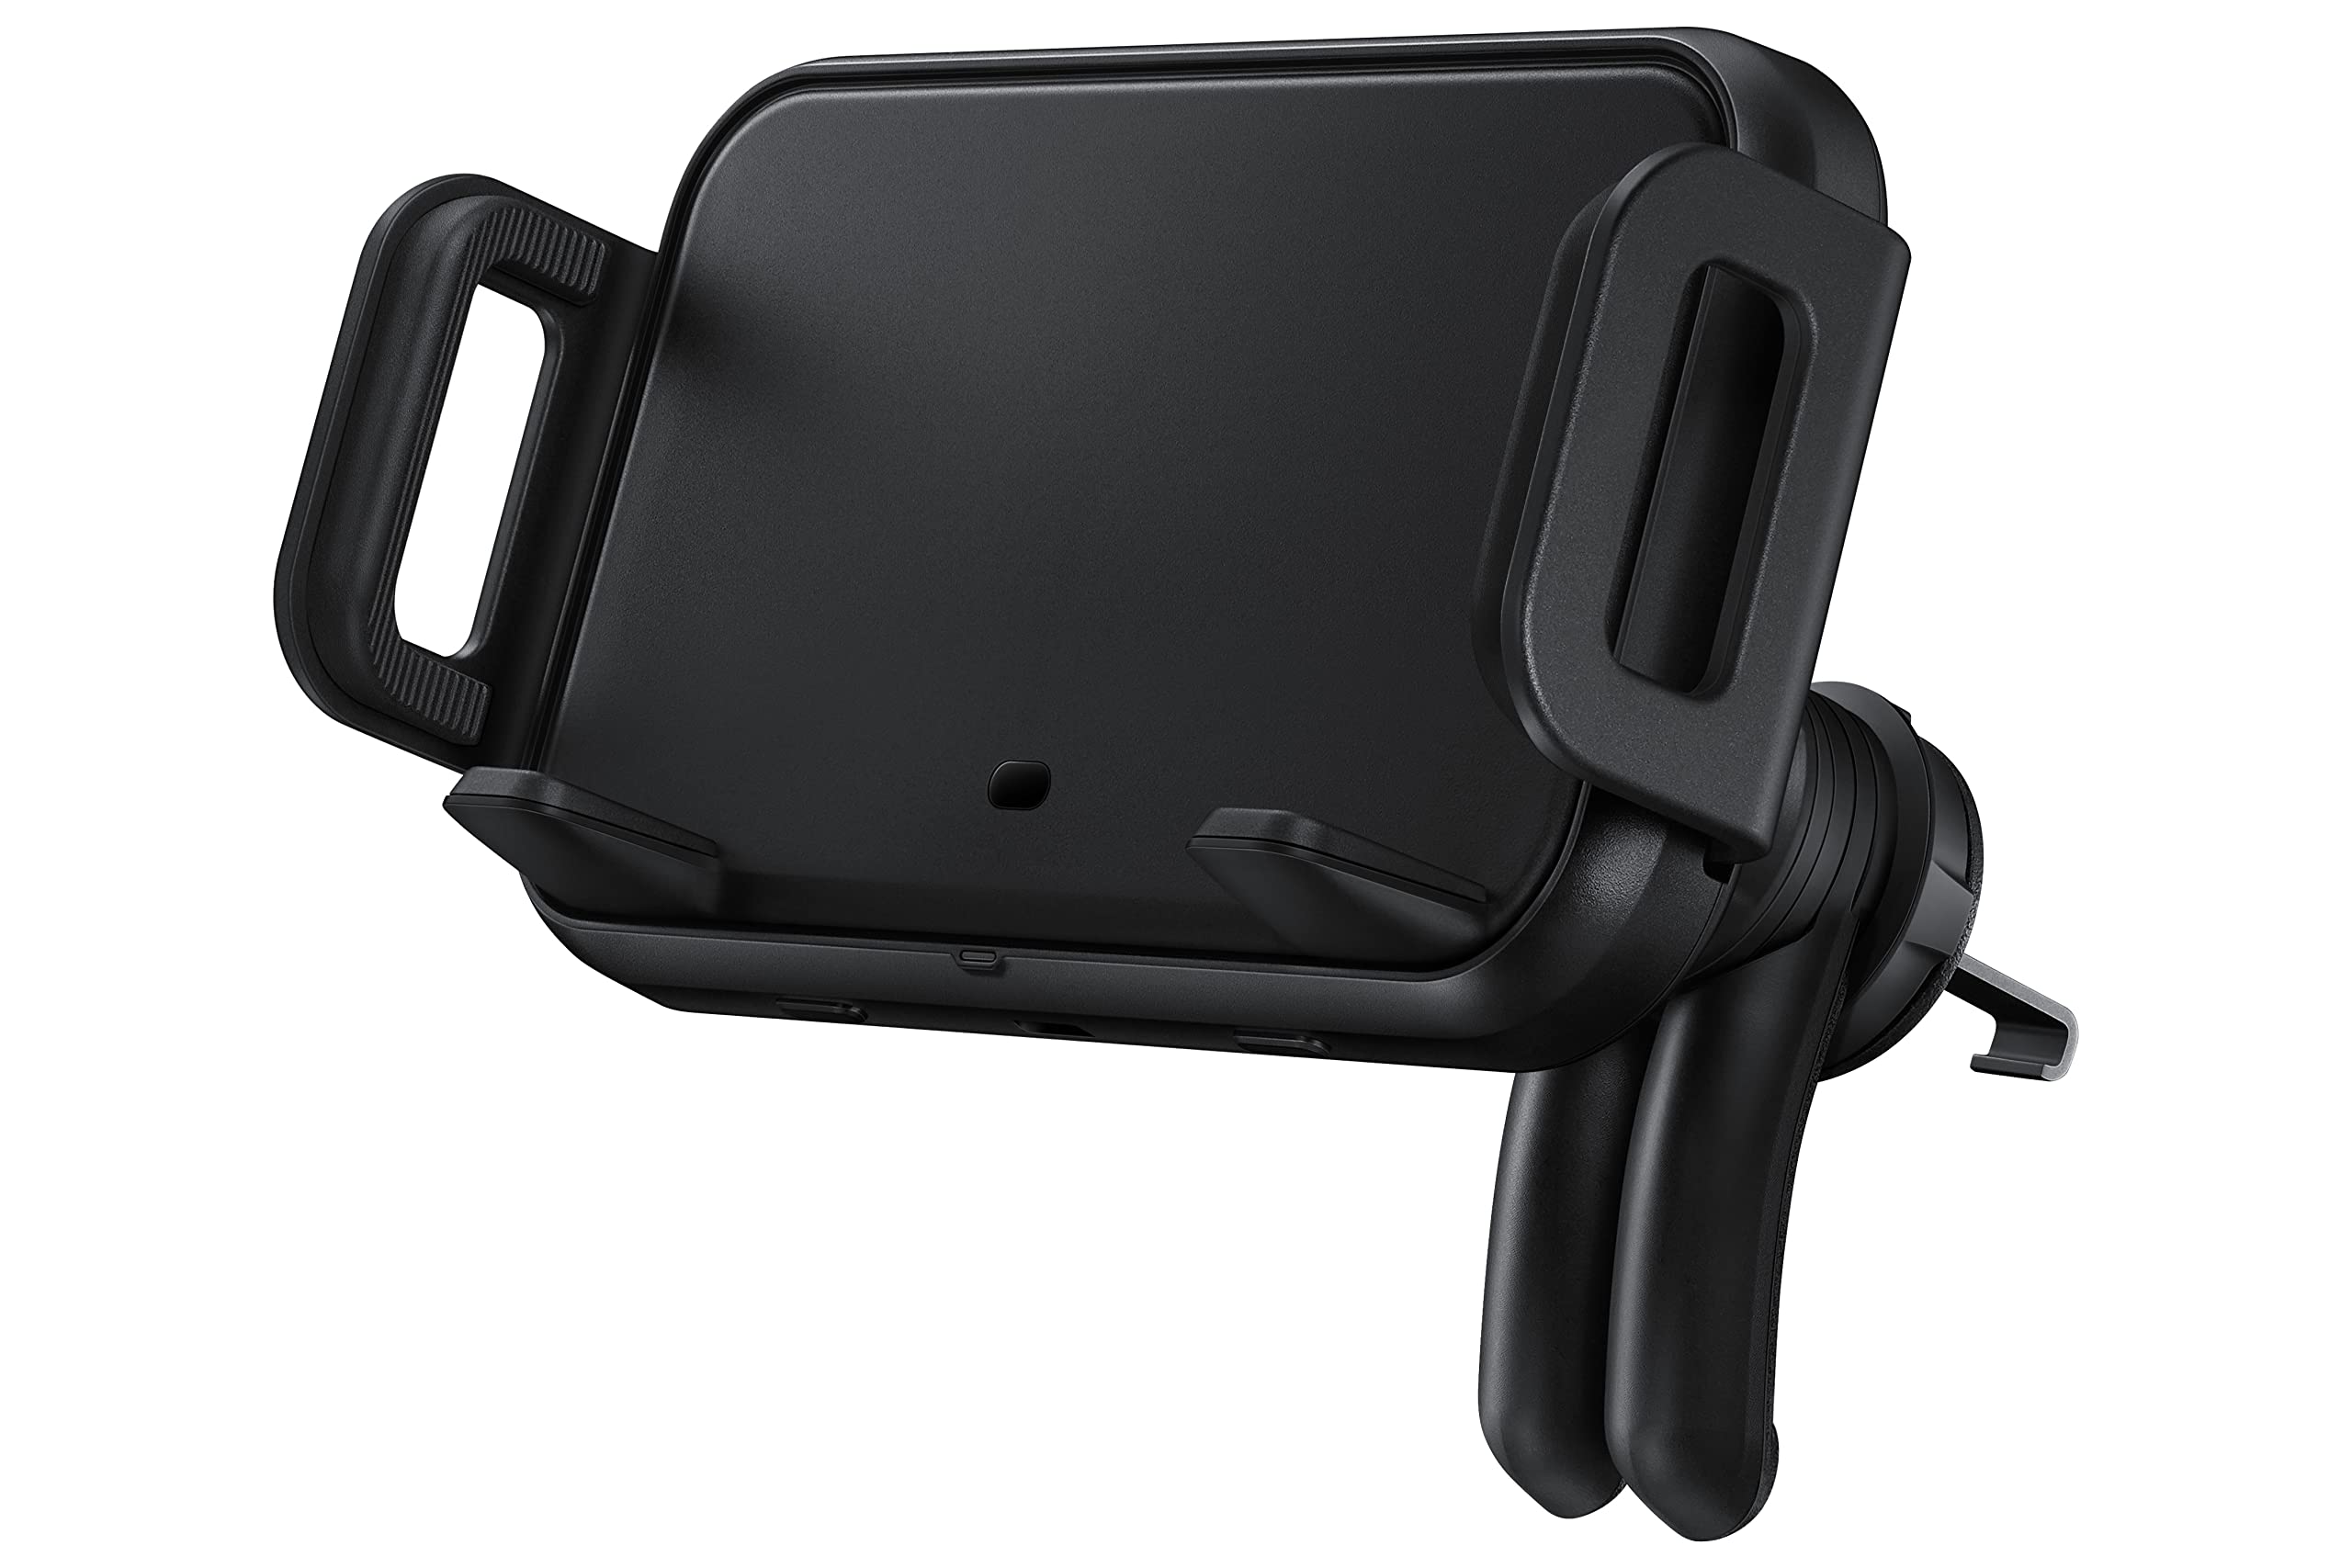 Samsung Car Mount with Automatic Electric Arm and Wireless Charger $19.99